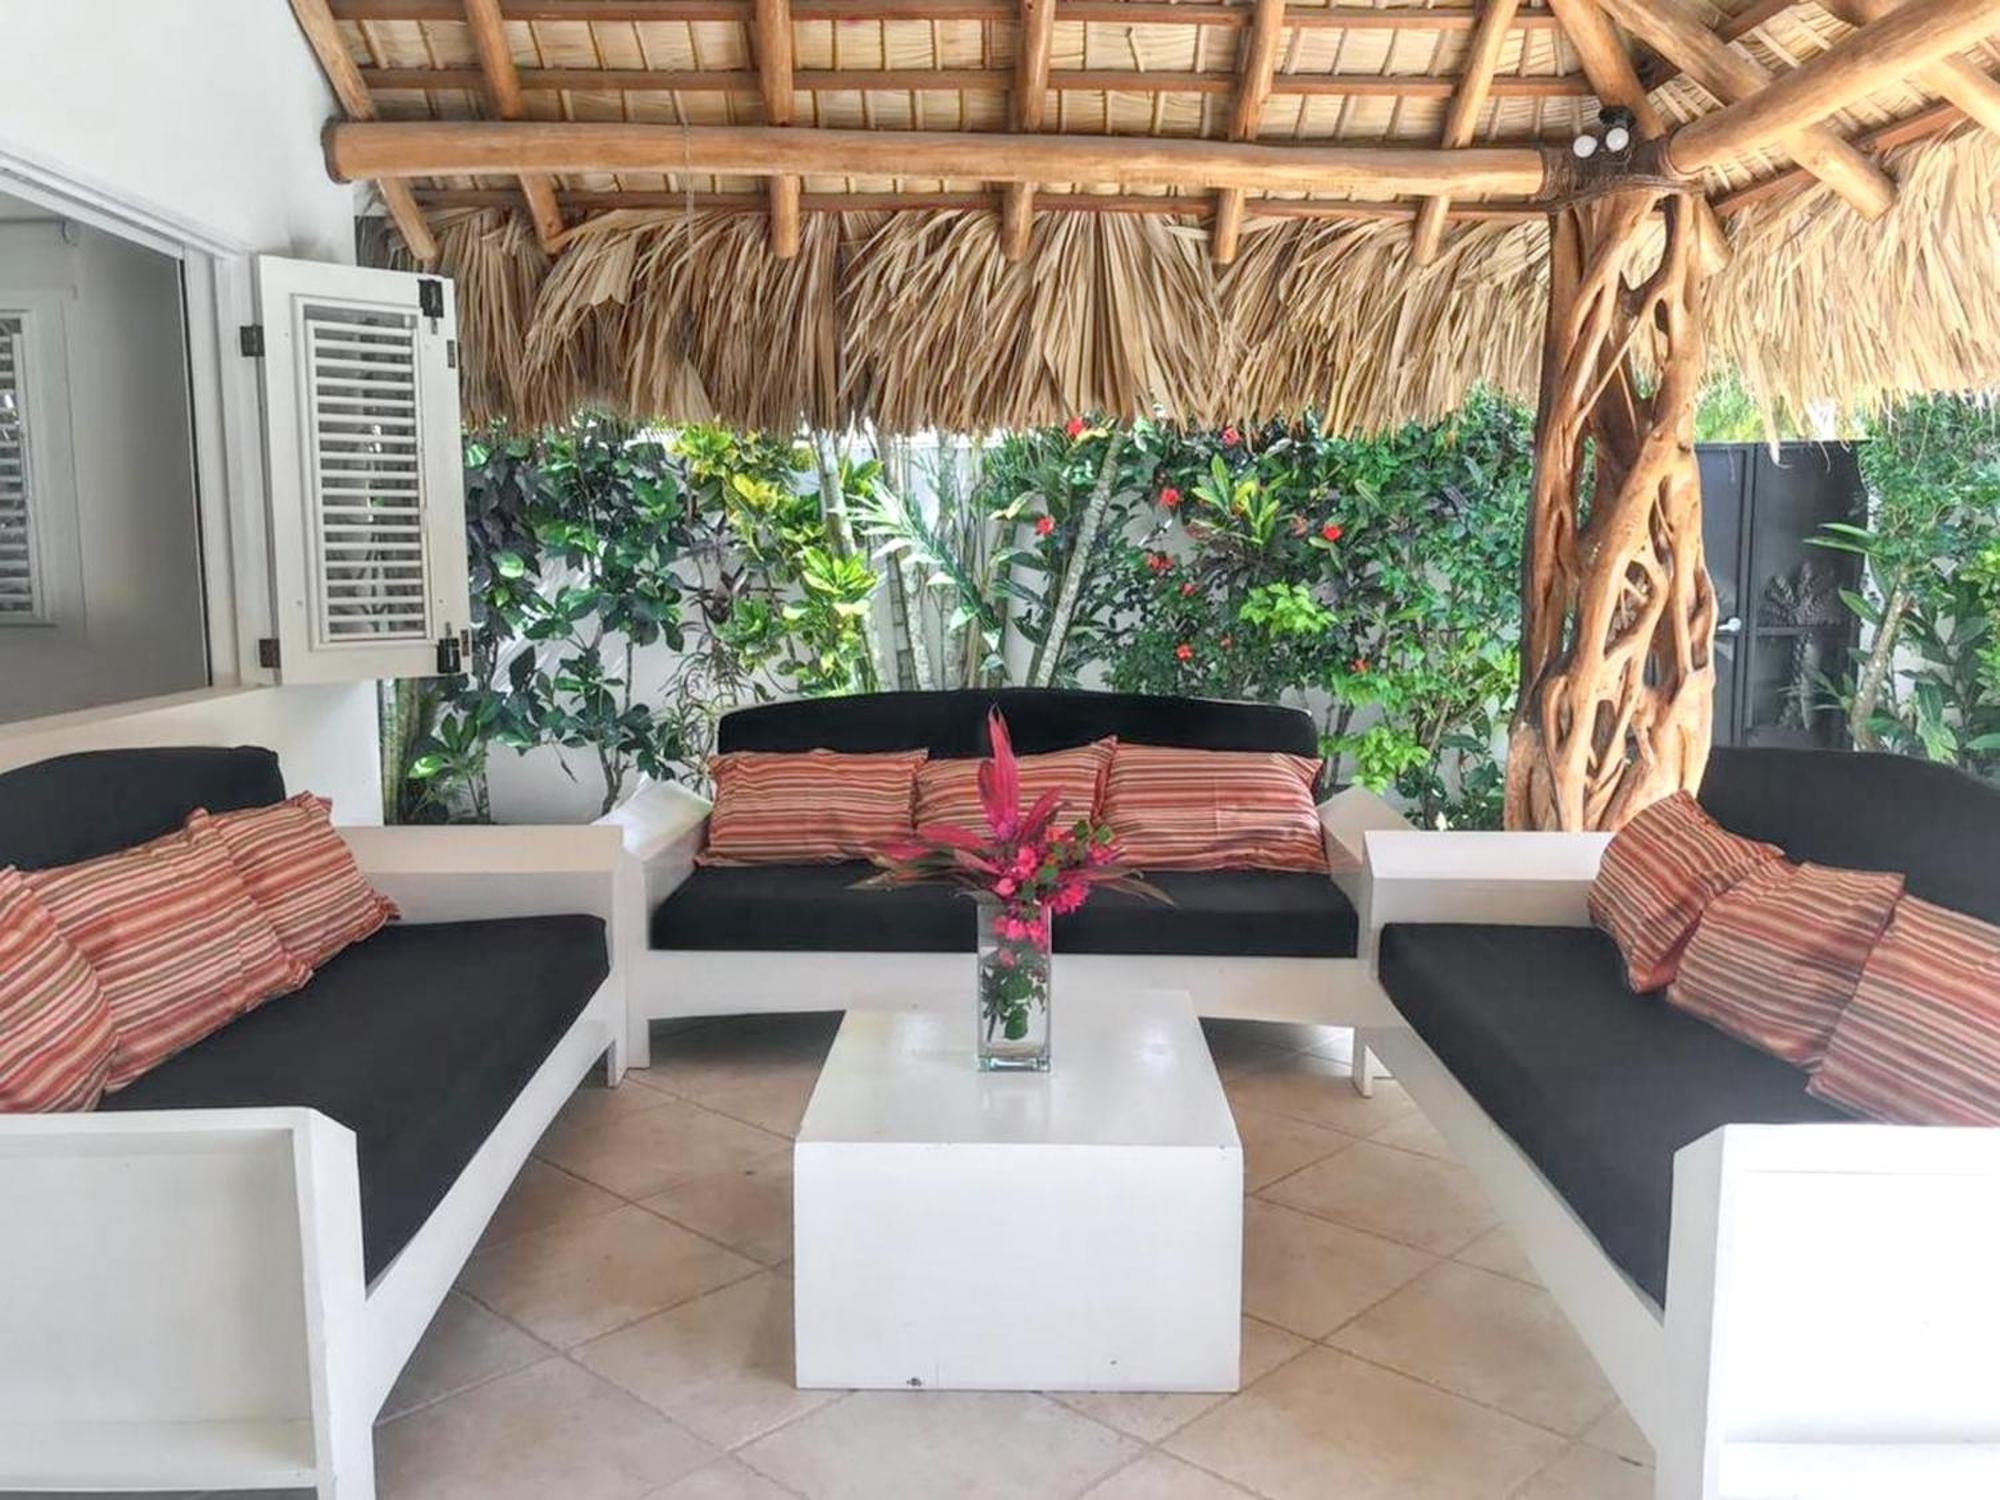 4 Bedrooms House At Las Terrenas 250 M Away From The Beach With Private Pool Enclosed Garden And Wifi 外观 照片